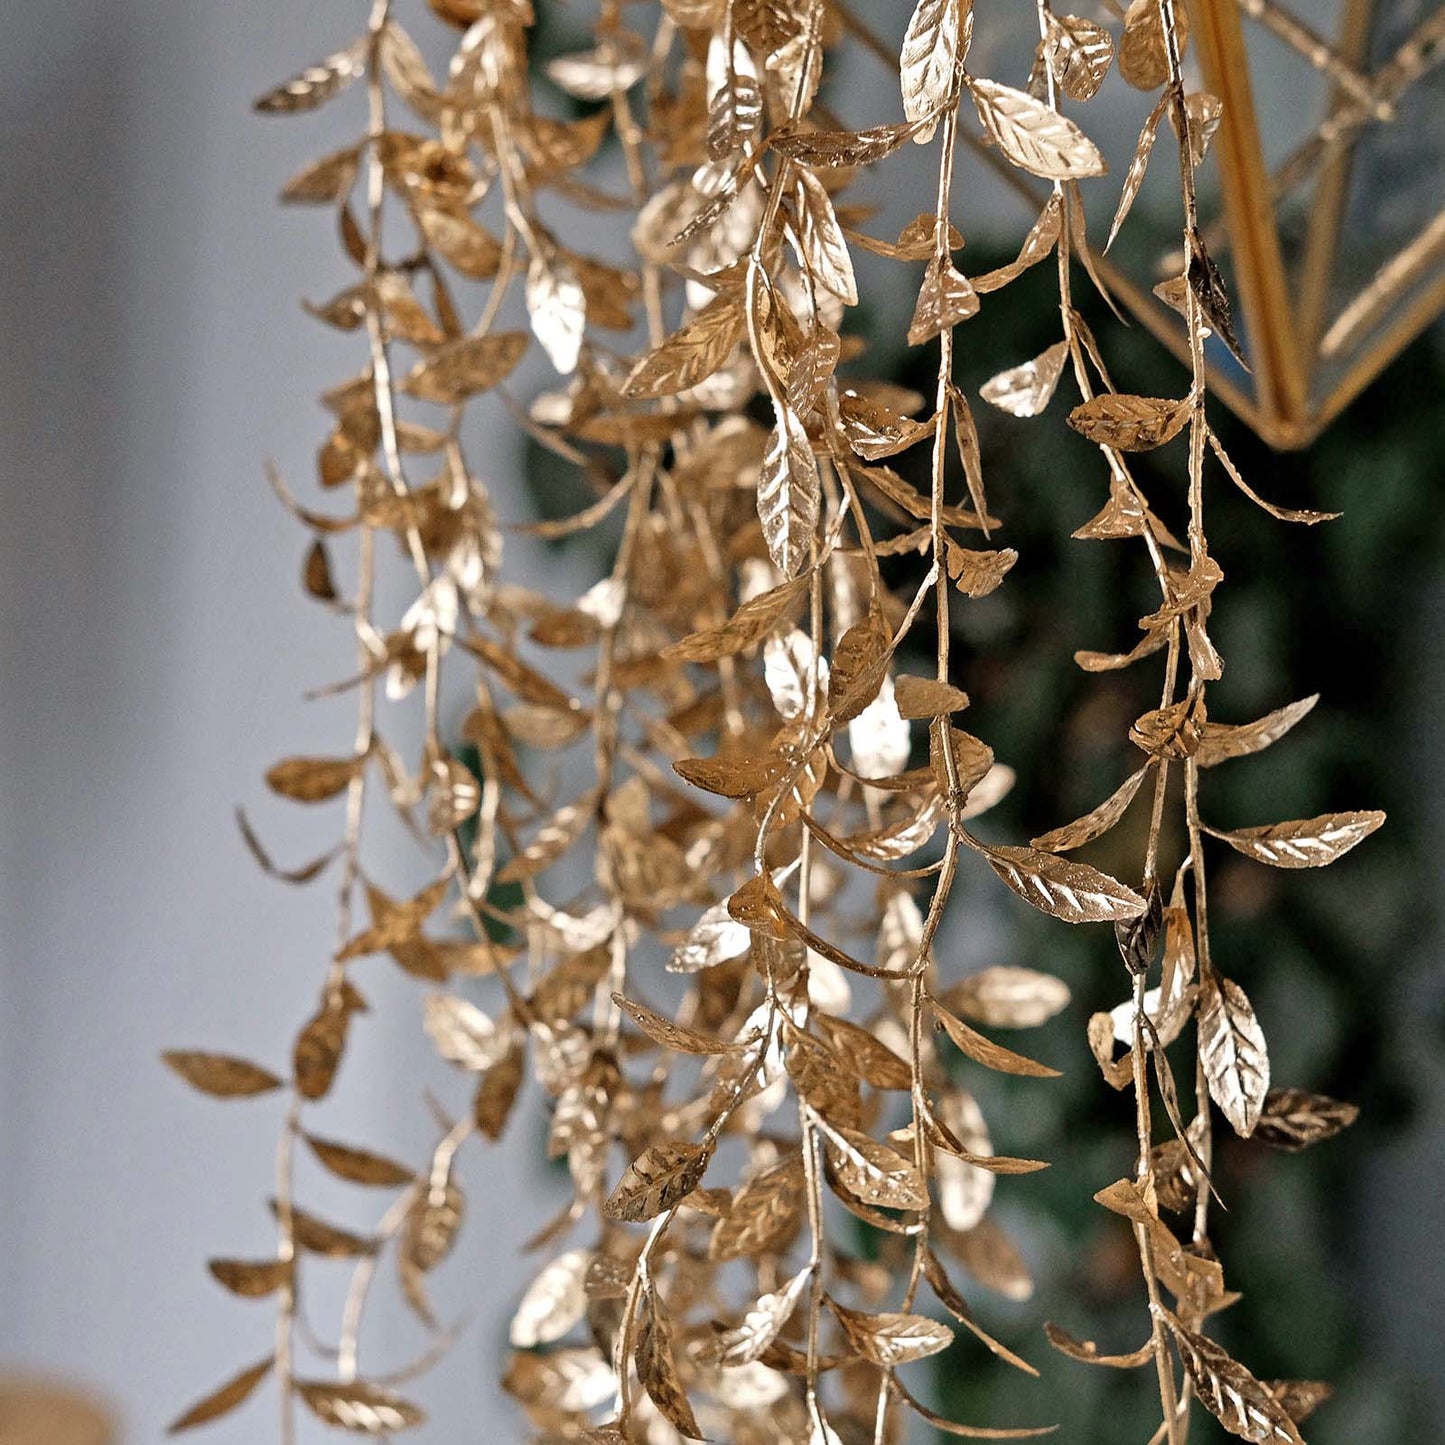 2 Pack Metallic Gold Artificial Hanging Ivy Leaf Stem Garlands, Faux Decorative Willow Vines 41"